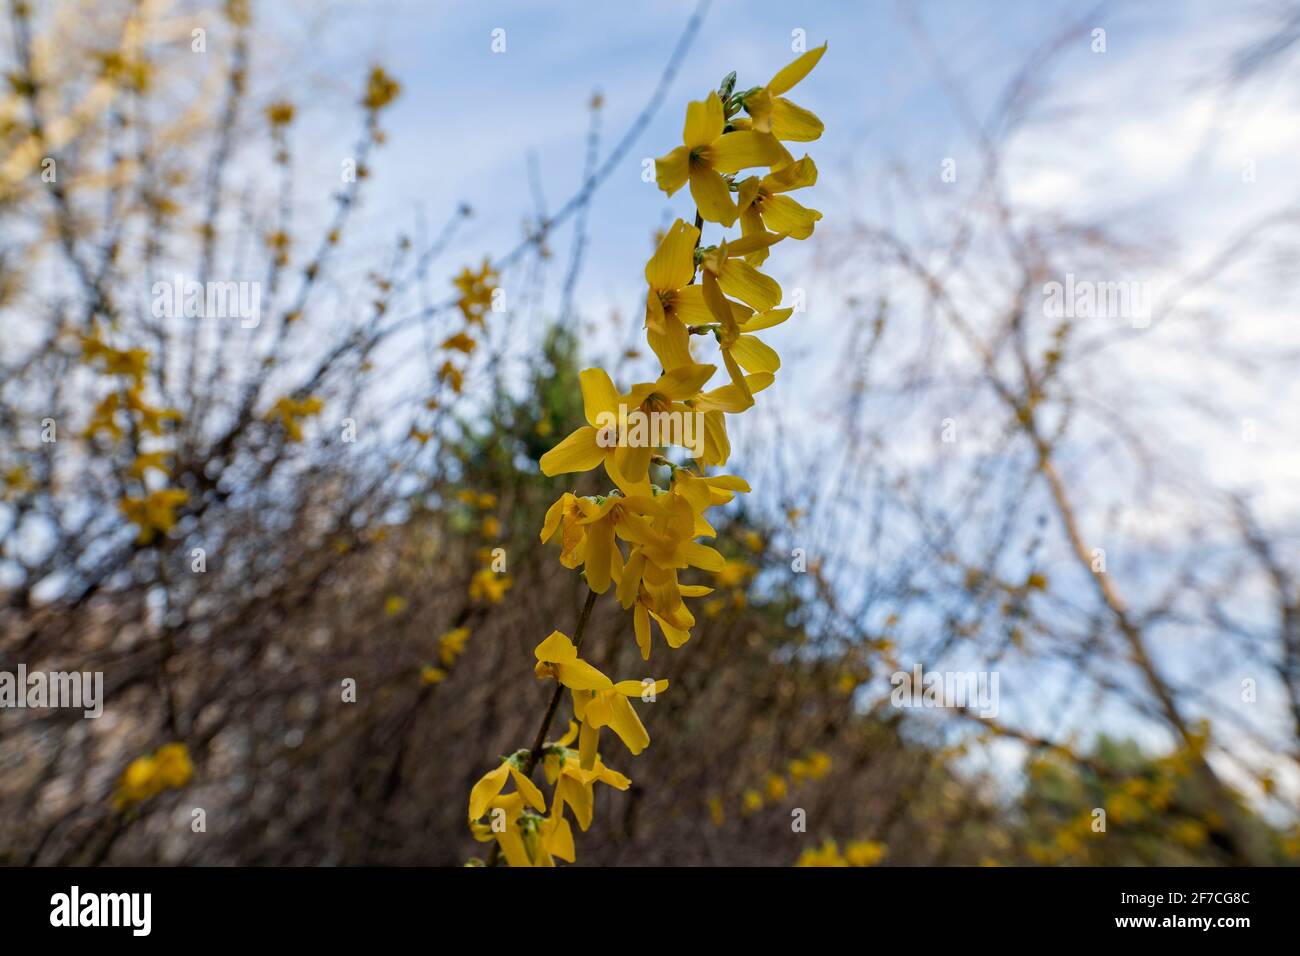 Forsythia flowers blossom and green new leaves begin to bloom along tree branches on sunny April day with blue skies and white clouds Stock Photo